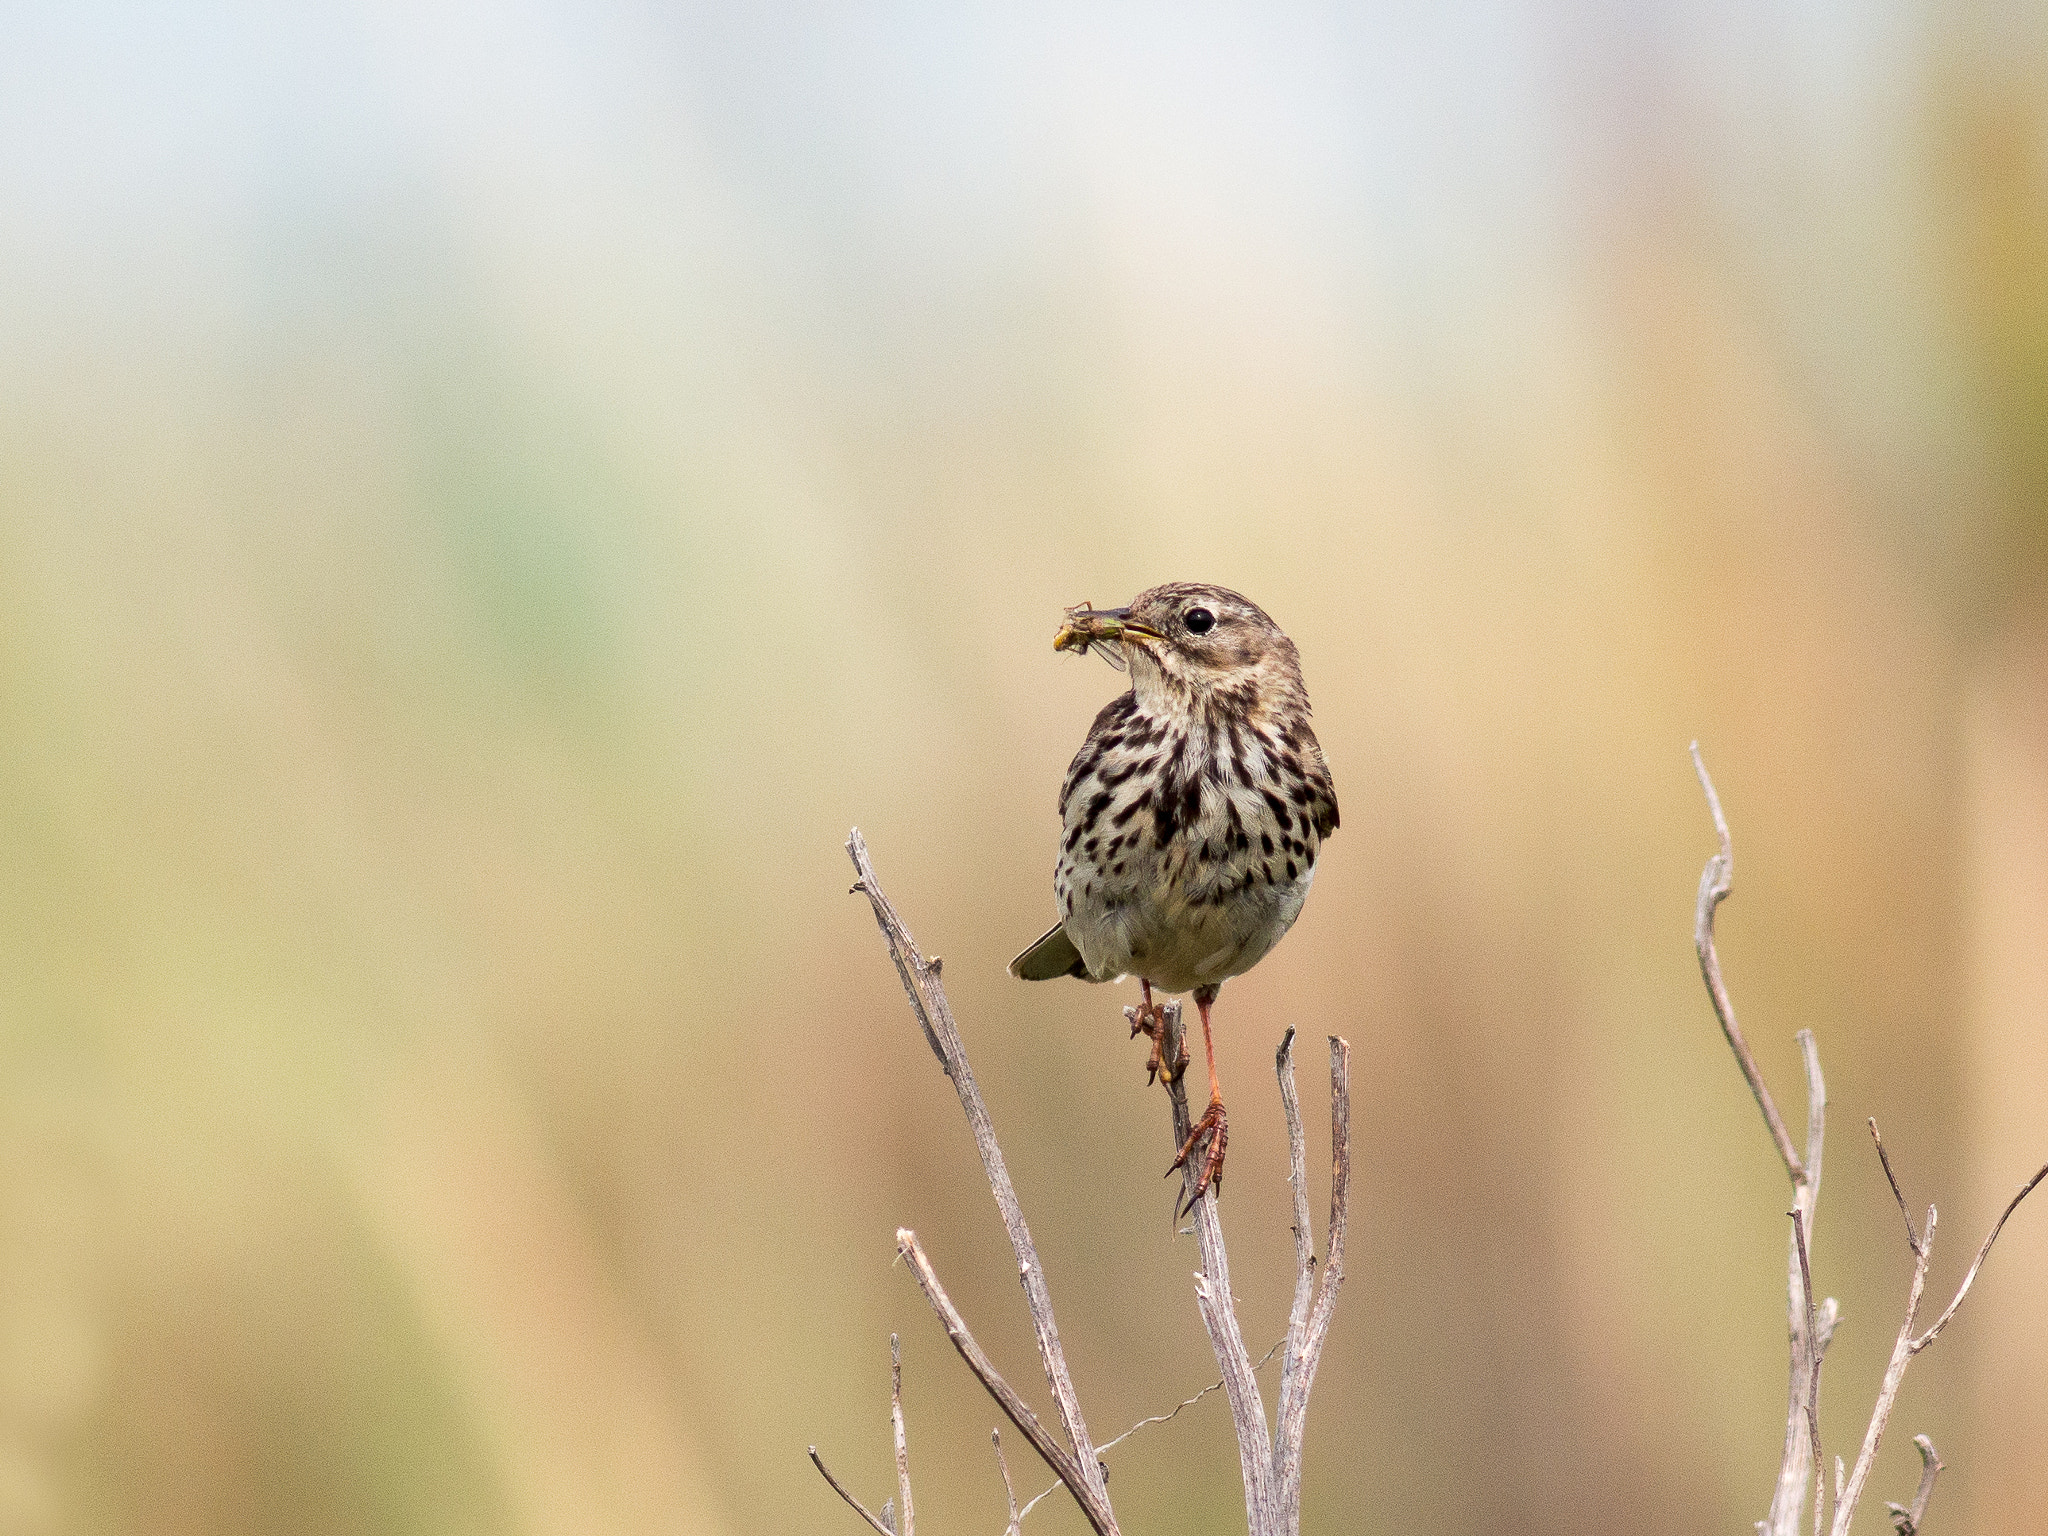 Metabones 400/5.6 sample photo. Meadow pipit photography